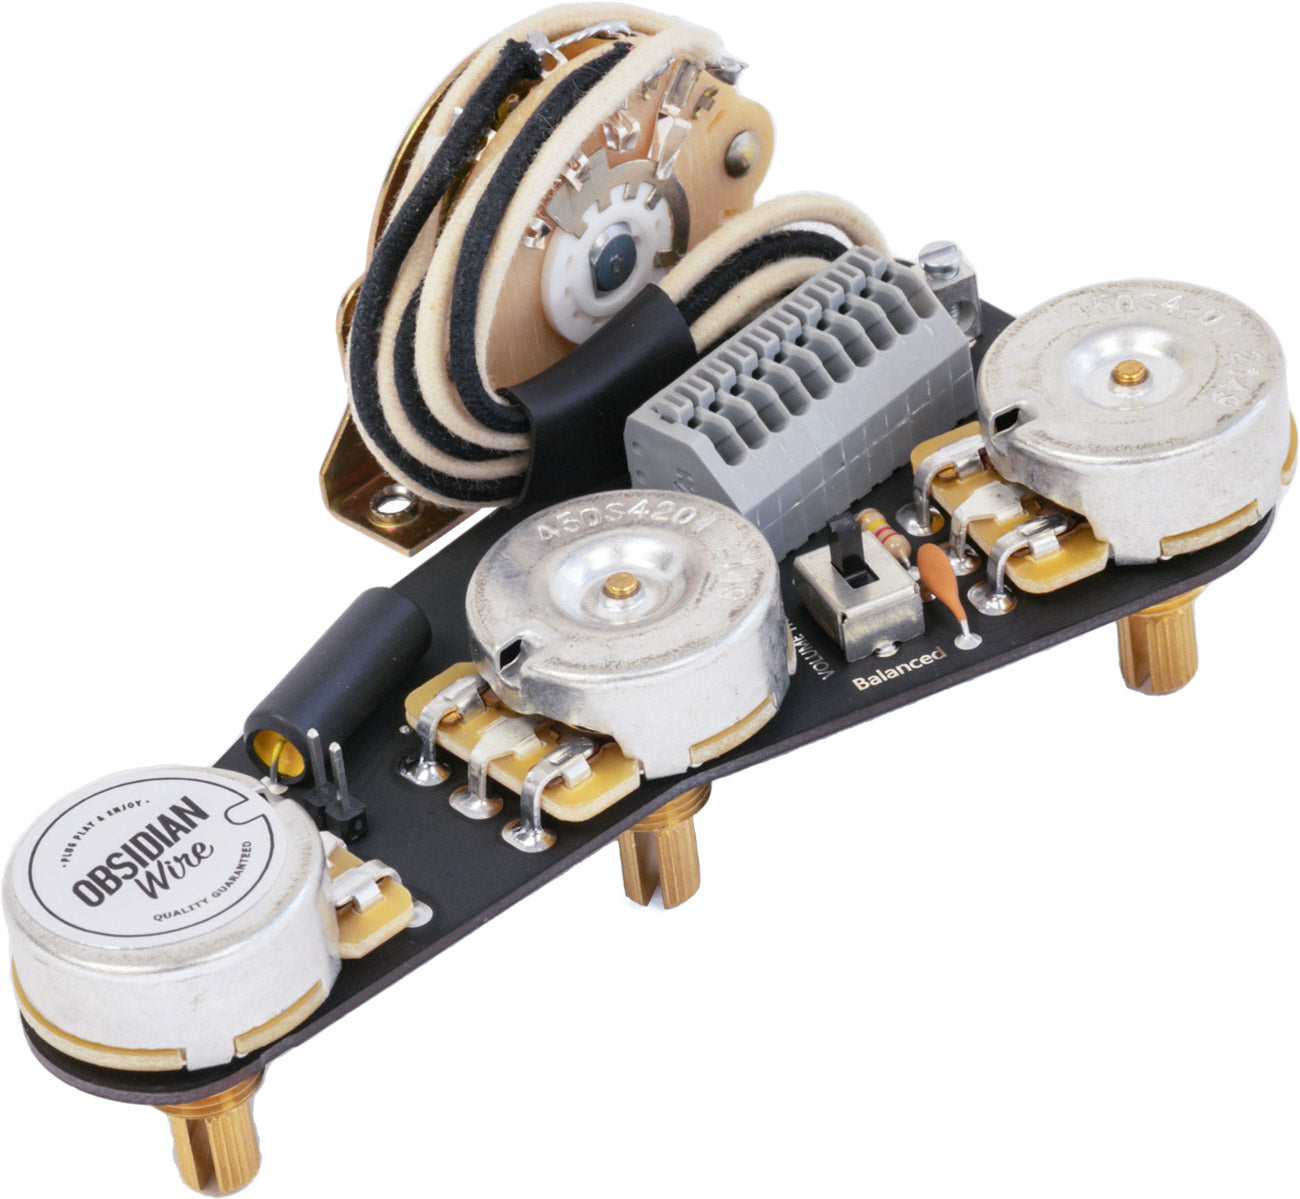 ObsidianWire Vintage Stratocaster Electronics Kit for Stratocaster Gen 2 Model with adjustable volume control voice